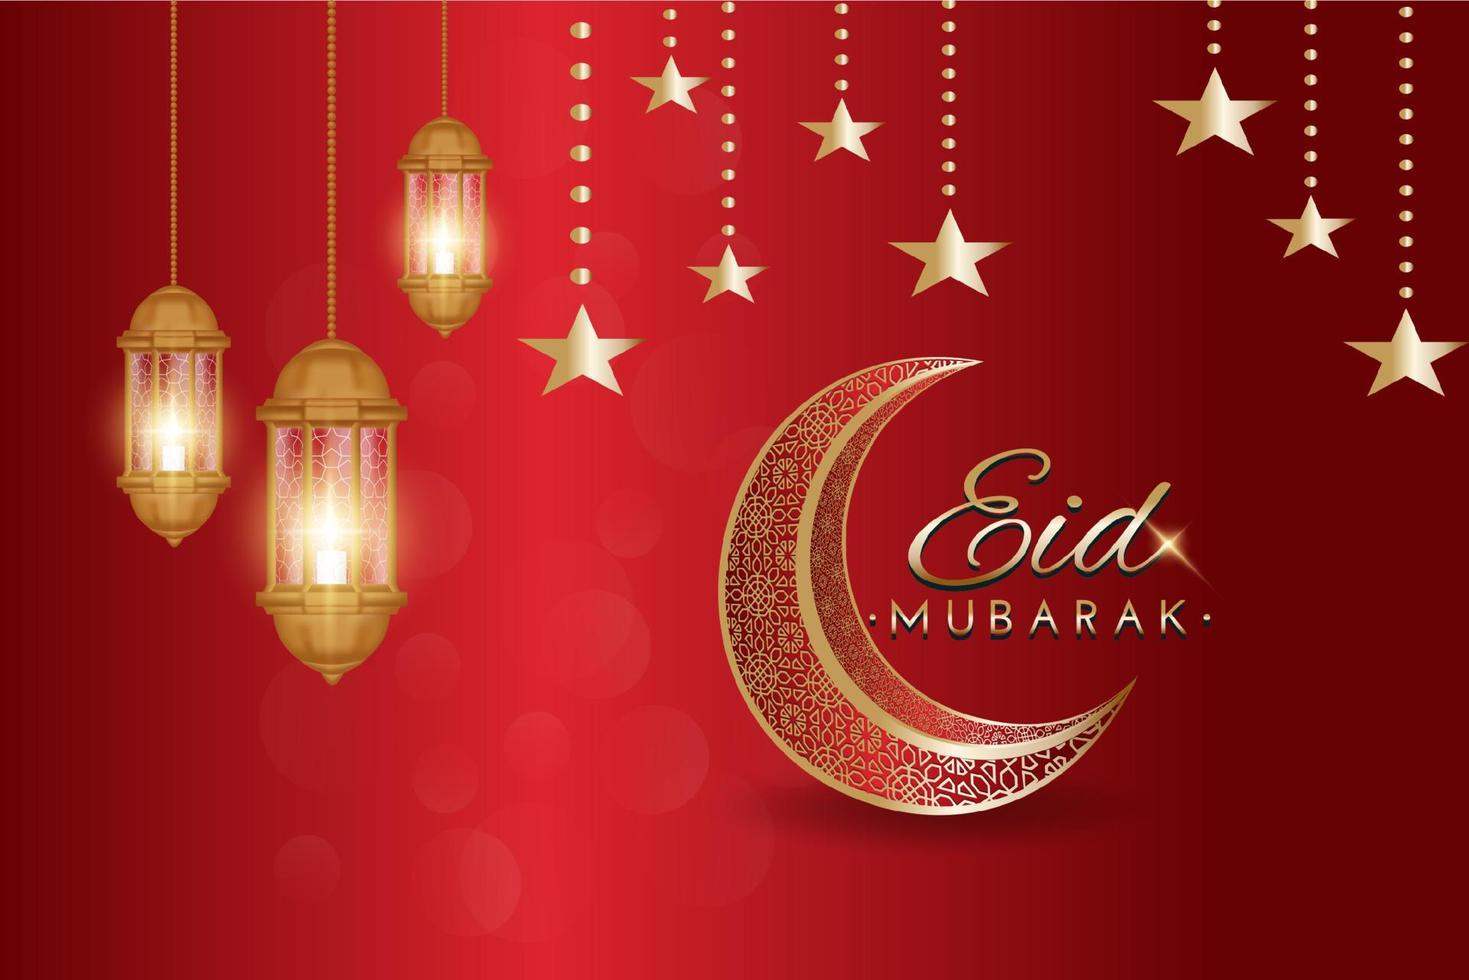 Eid Mubarak greeting card decorated with arabic lanterns, crescent moon and calligraphy vector